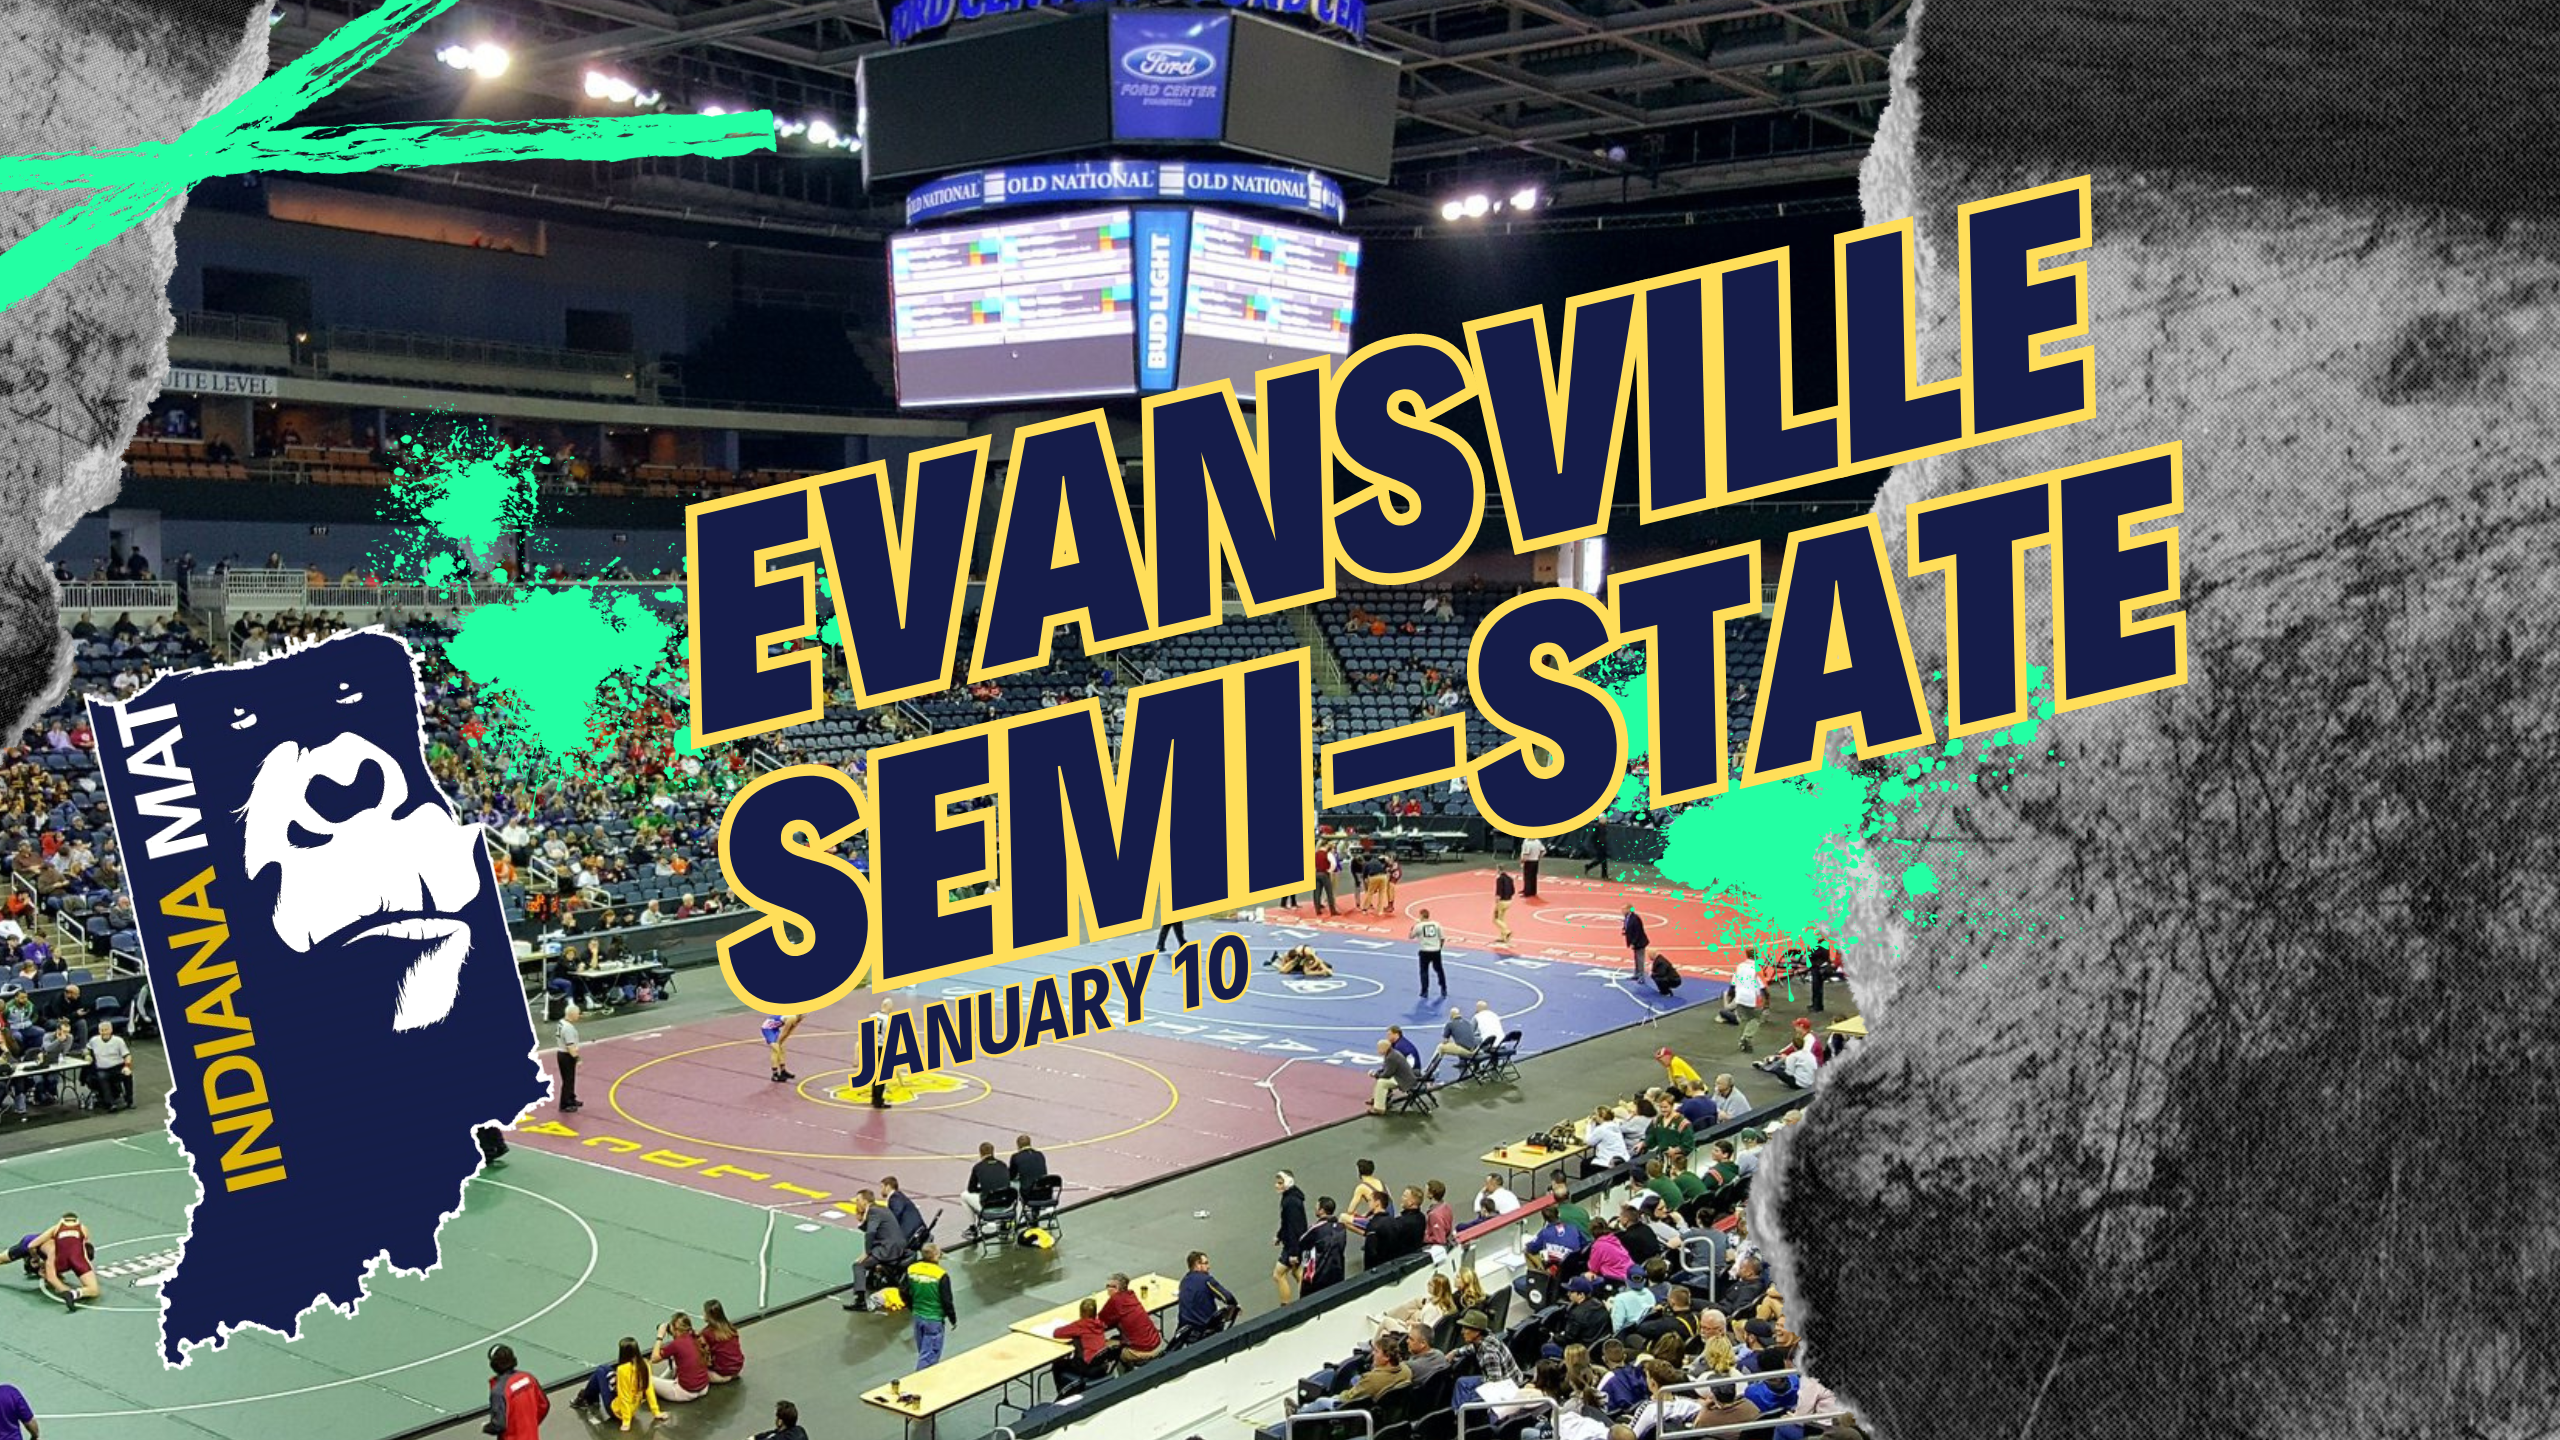 More information about "Evansville #4"